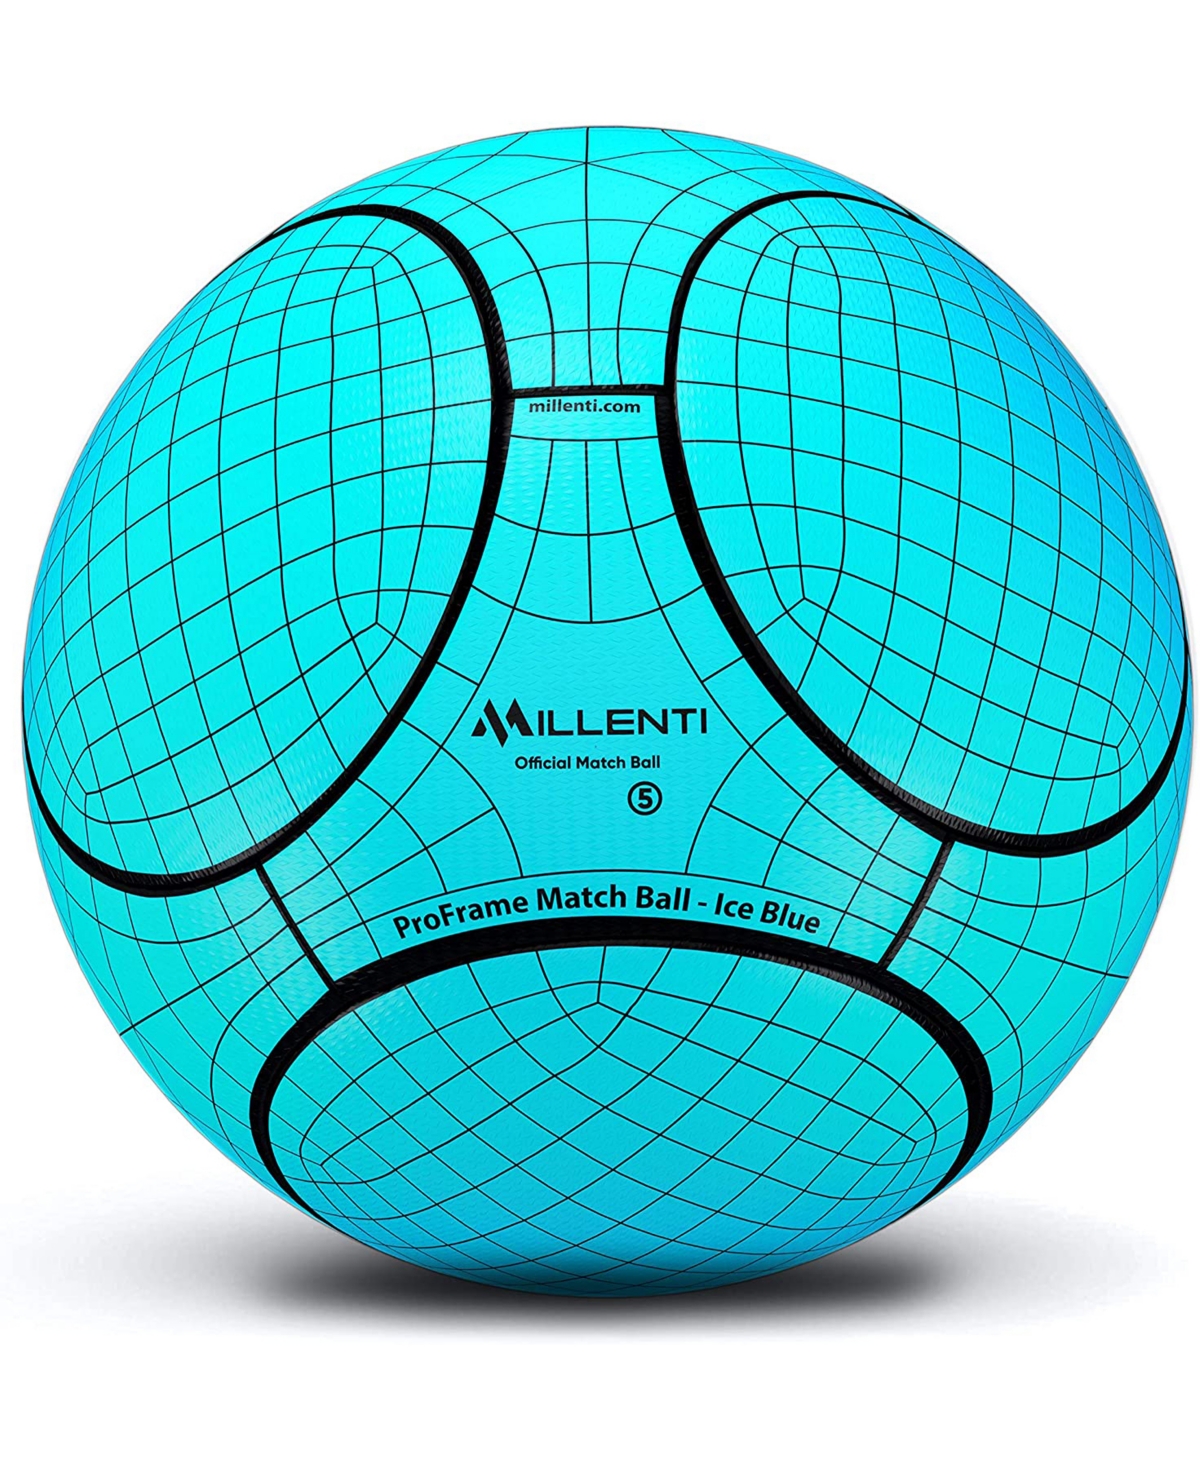 Millenti Us Soccer Ball Official Size 5 - Reverse Bend-it Soccer Ball With High-visibility, Easy-to-track Pro In Blue